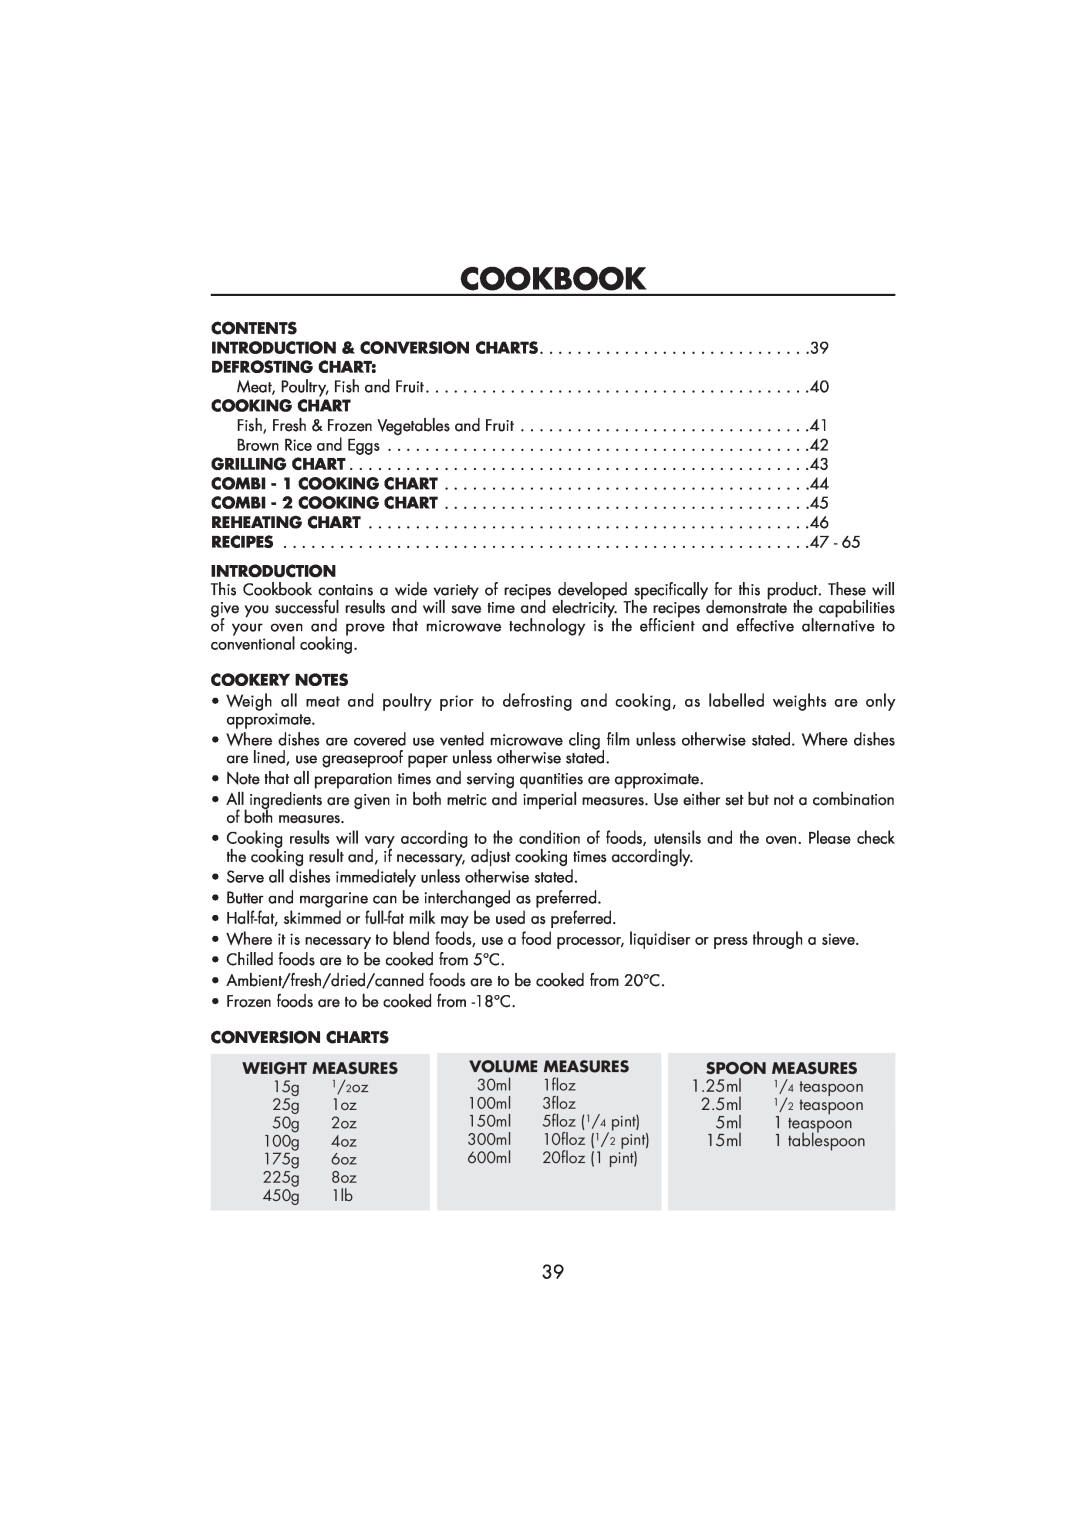 Sharp R-890SLM Cookbook, Contents, Defrosting Chart, Cooking Chart, Introduction, Cookery Notes, Conversion Charts 